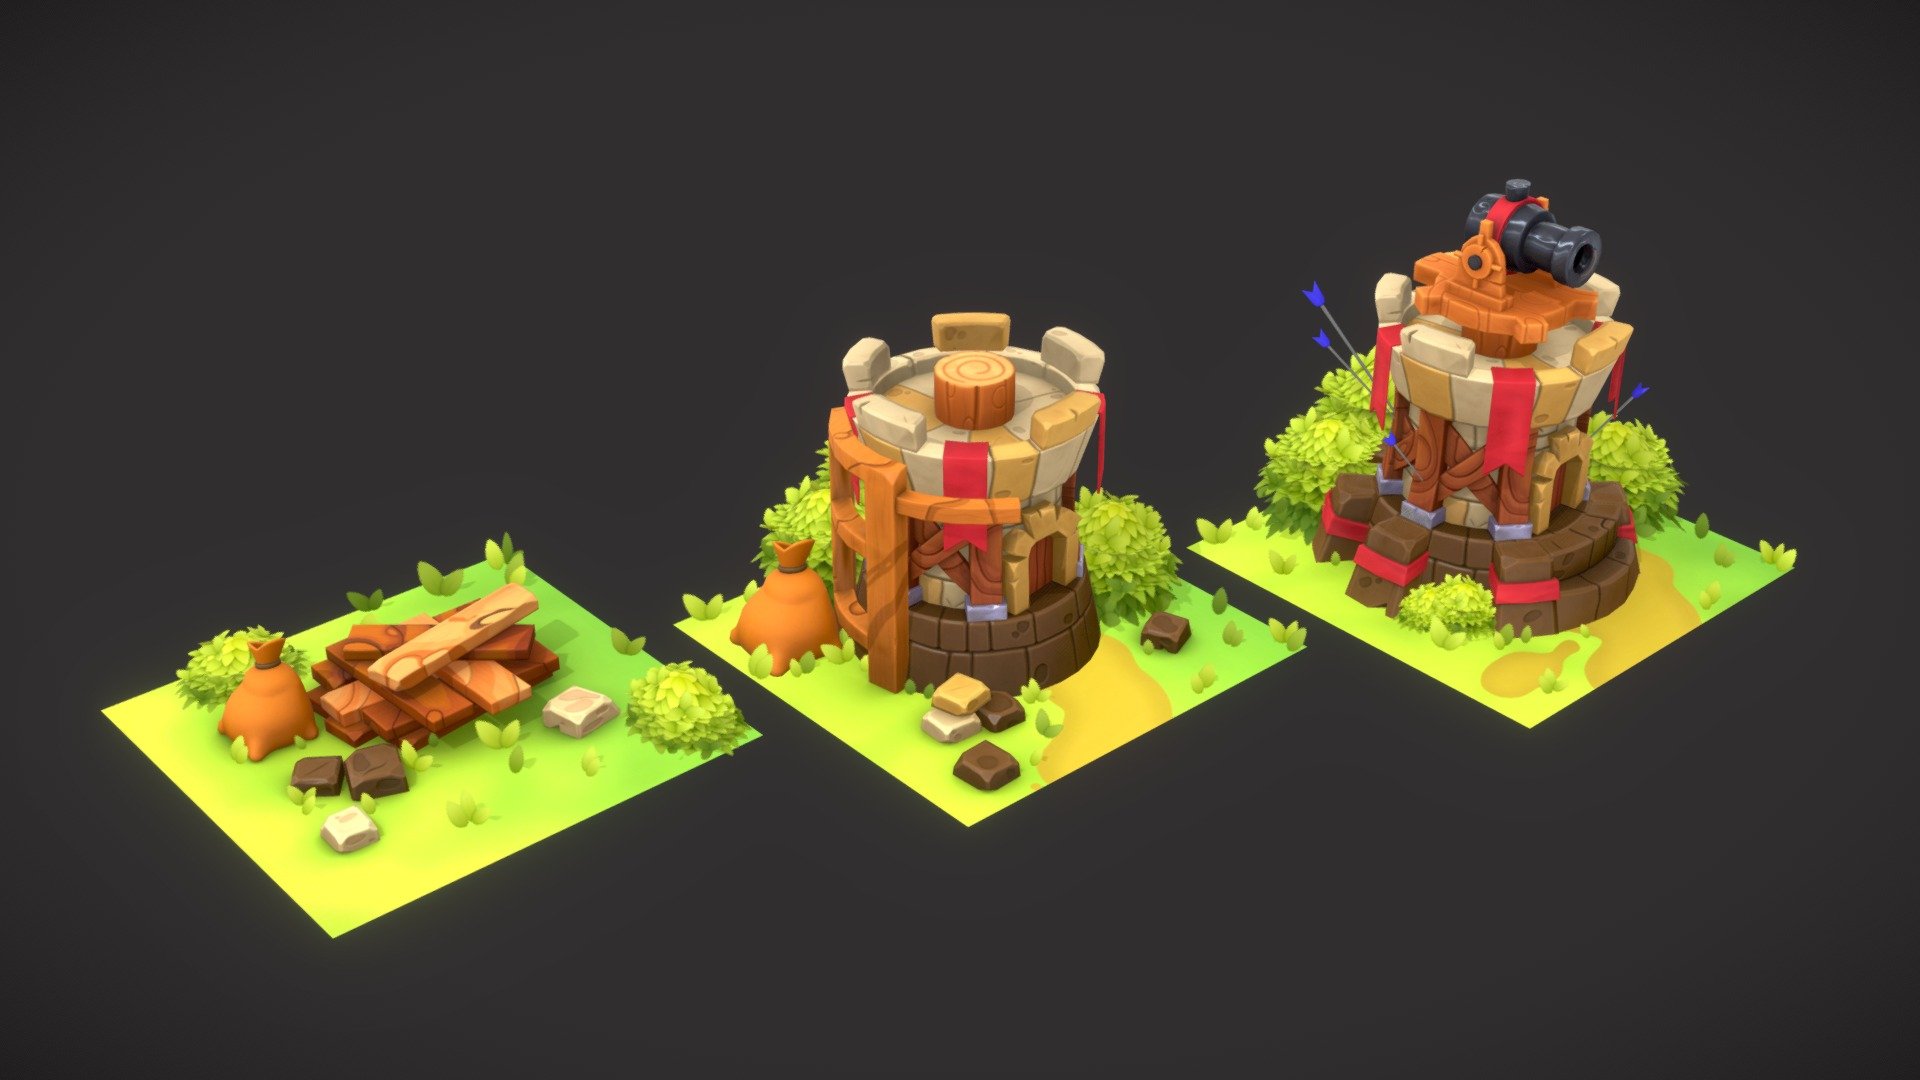 Game-Ready Stylized Tower

In this model, I wanted to make a game-ready asset with as low-poly as possible, and I was able to make the whole scene under 11,500 triangles while doing this, I took care to stay as the concept as possible.

I used two textures in the model. one for the Tower itself and the other for the bushes and grasses.

The model was made in Maya and the sculpt was made in Blender, the textures were done in Substance Painter and Photoshop. Rendered in Blender and composited in DaVinci Resolve.

View full project on Artstastion
https://www.artstation.com/artwork/EaGdBv - Stylize Tower - 3D model by Atilay 3d model